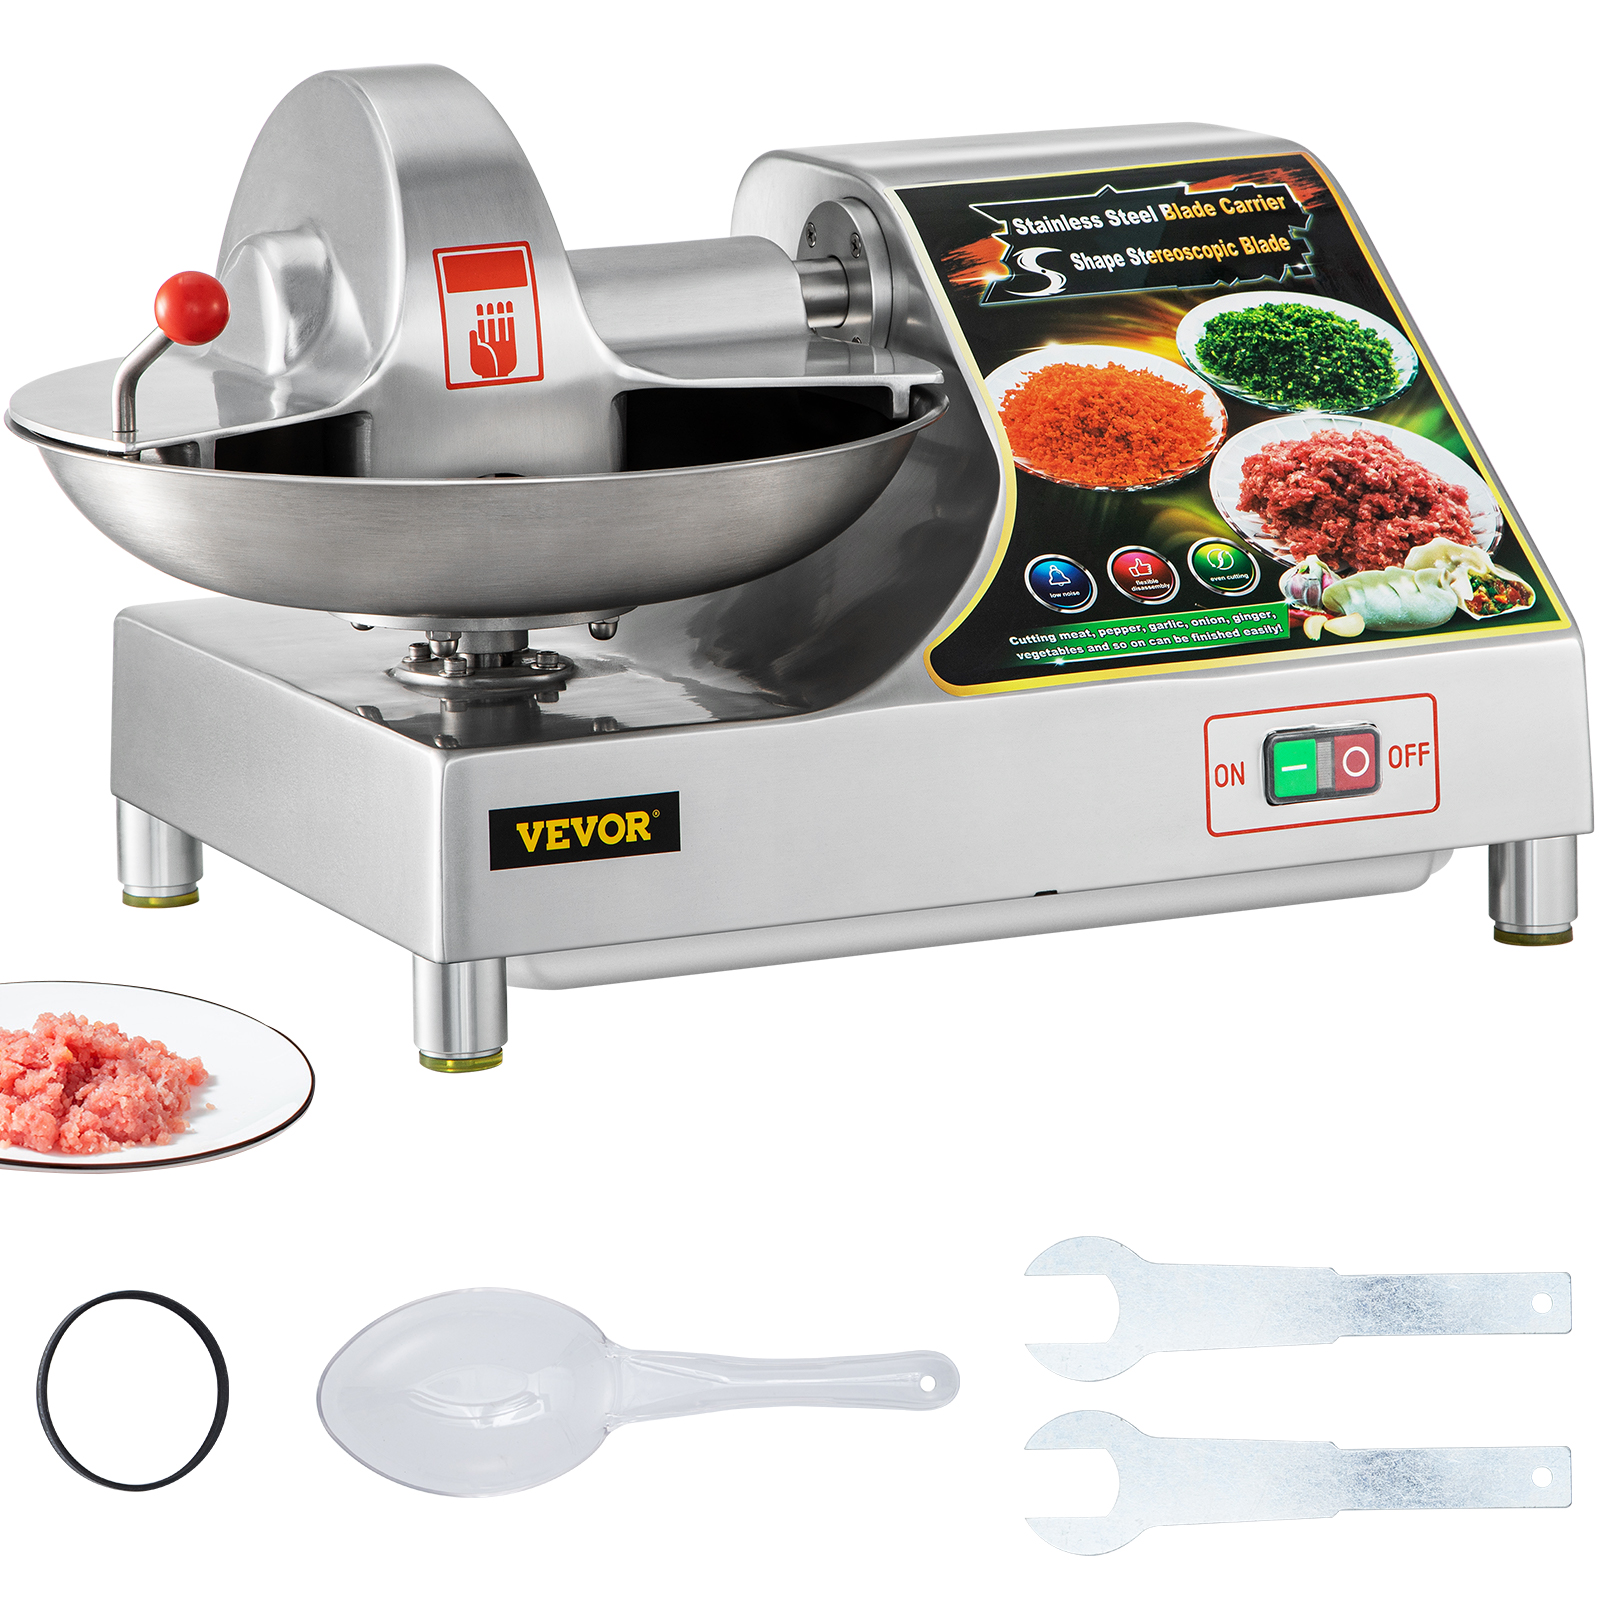 VEVOR Commercial 10L Multifunction Meat Bowl Cutter Mixer 400W Buffalo Chopper от Vevor Many GEOs